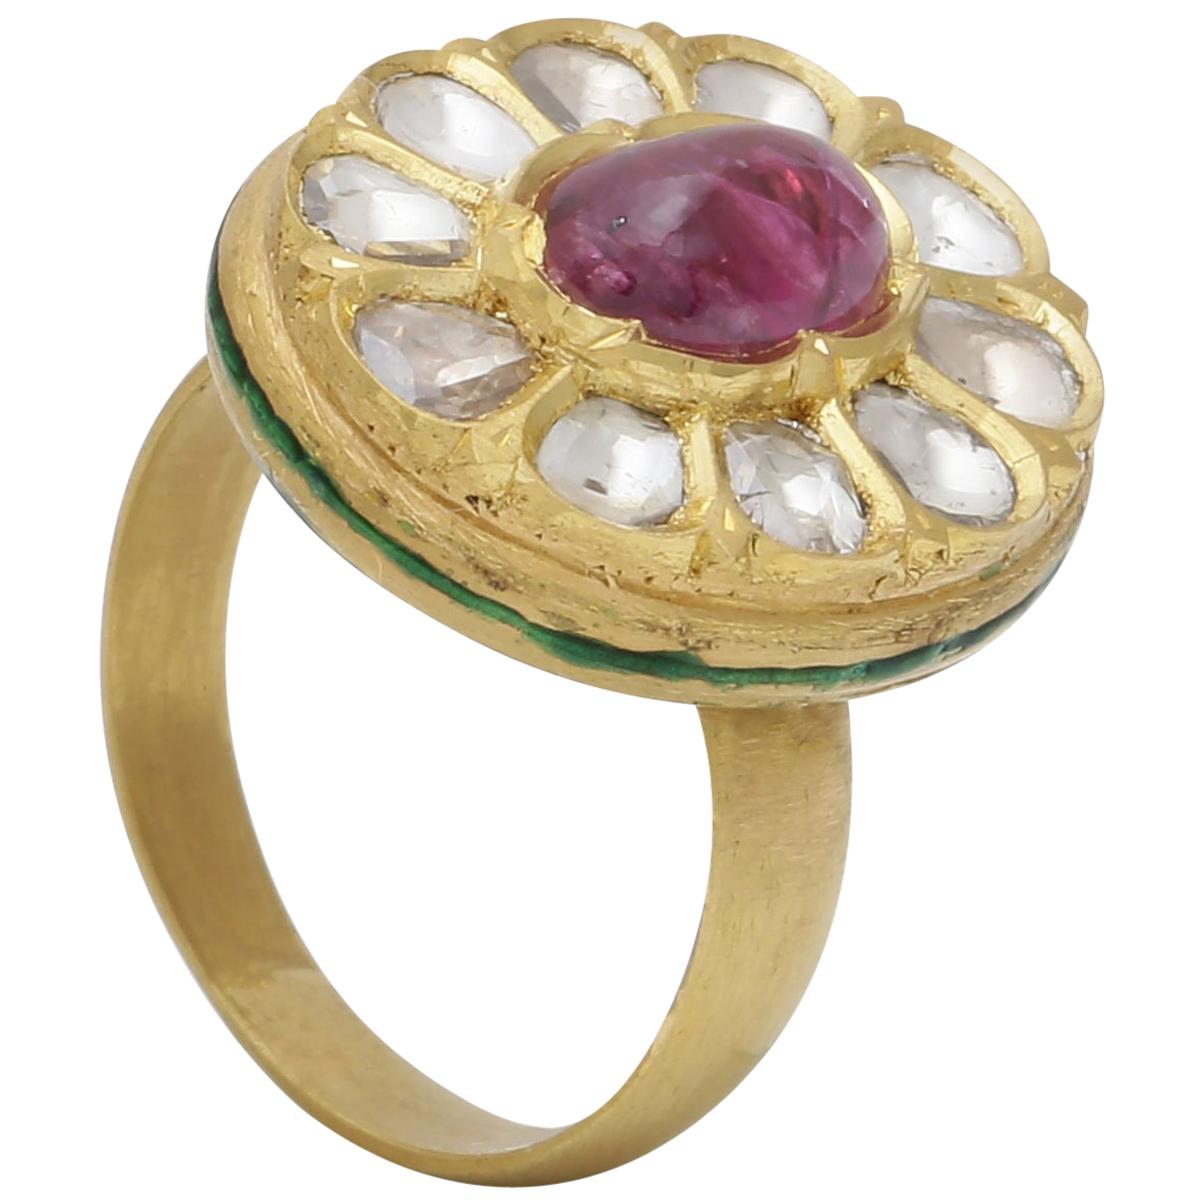 Ruby Cabochon with Uncut Diamonds Enamel Ring Handcrafted in 22K Yellow Gold